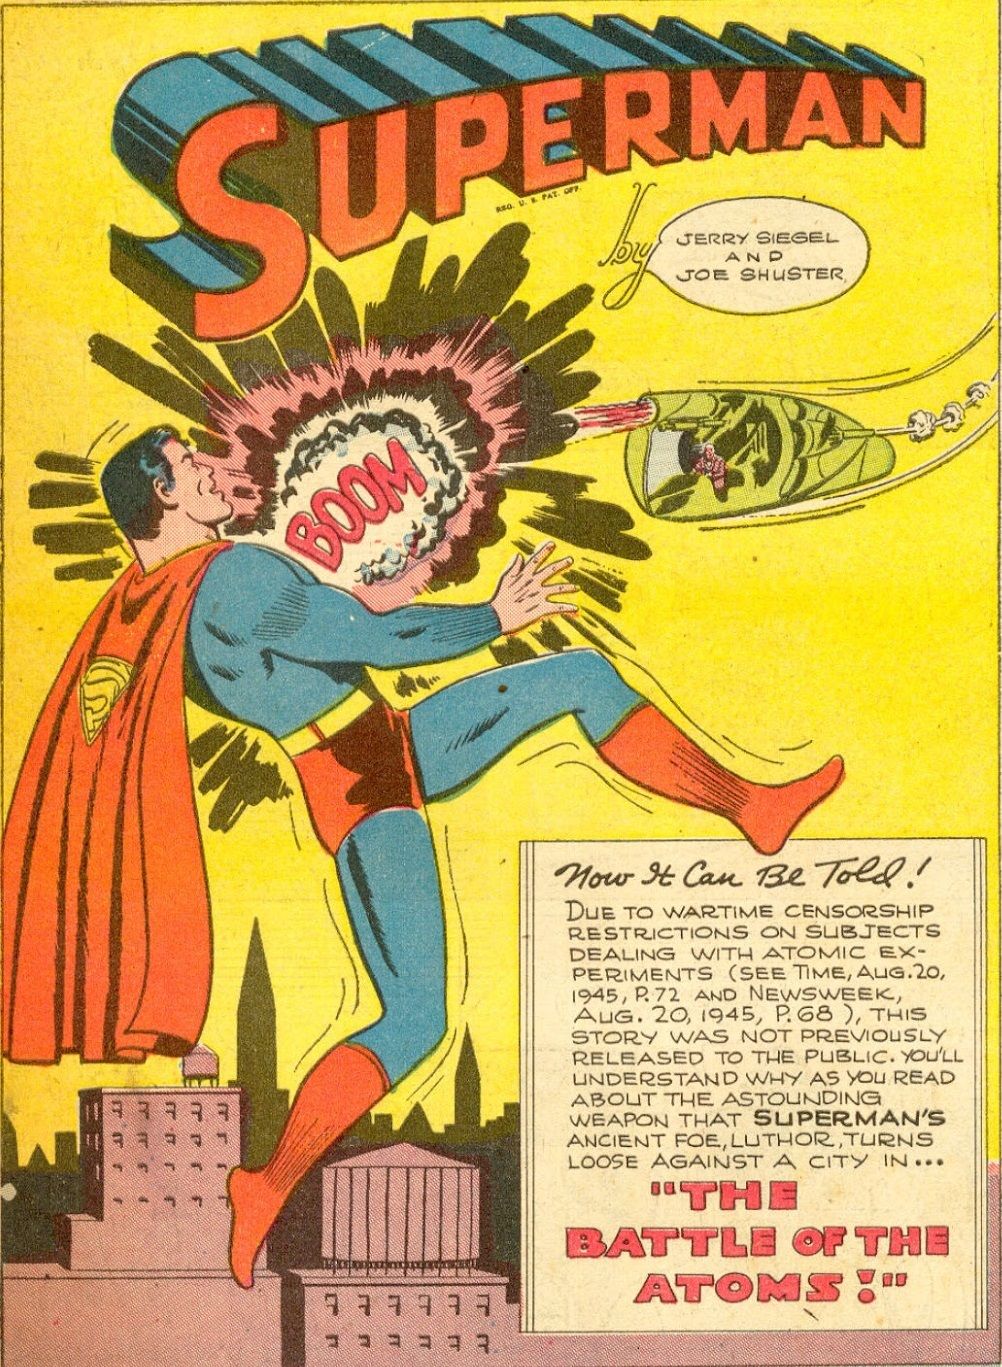 A Superman comic that bragged about being censored